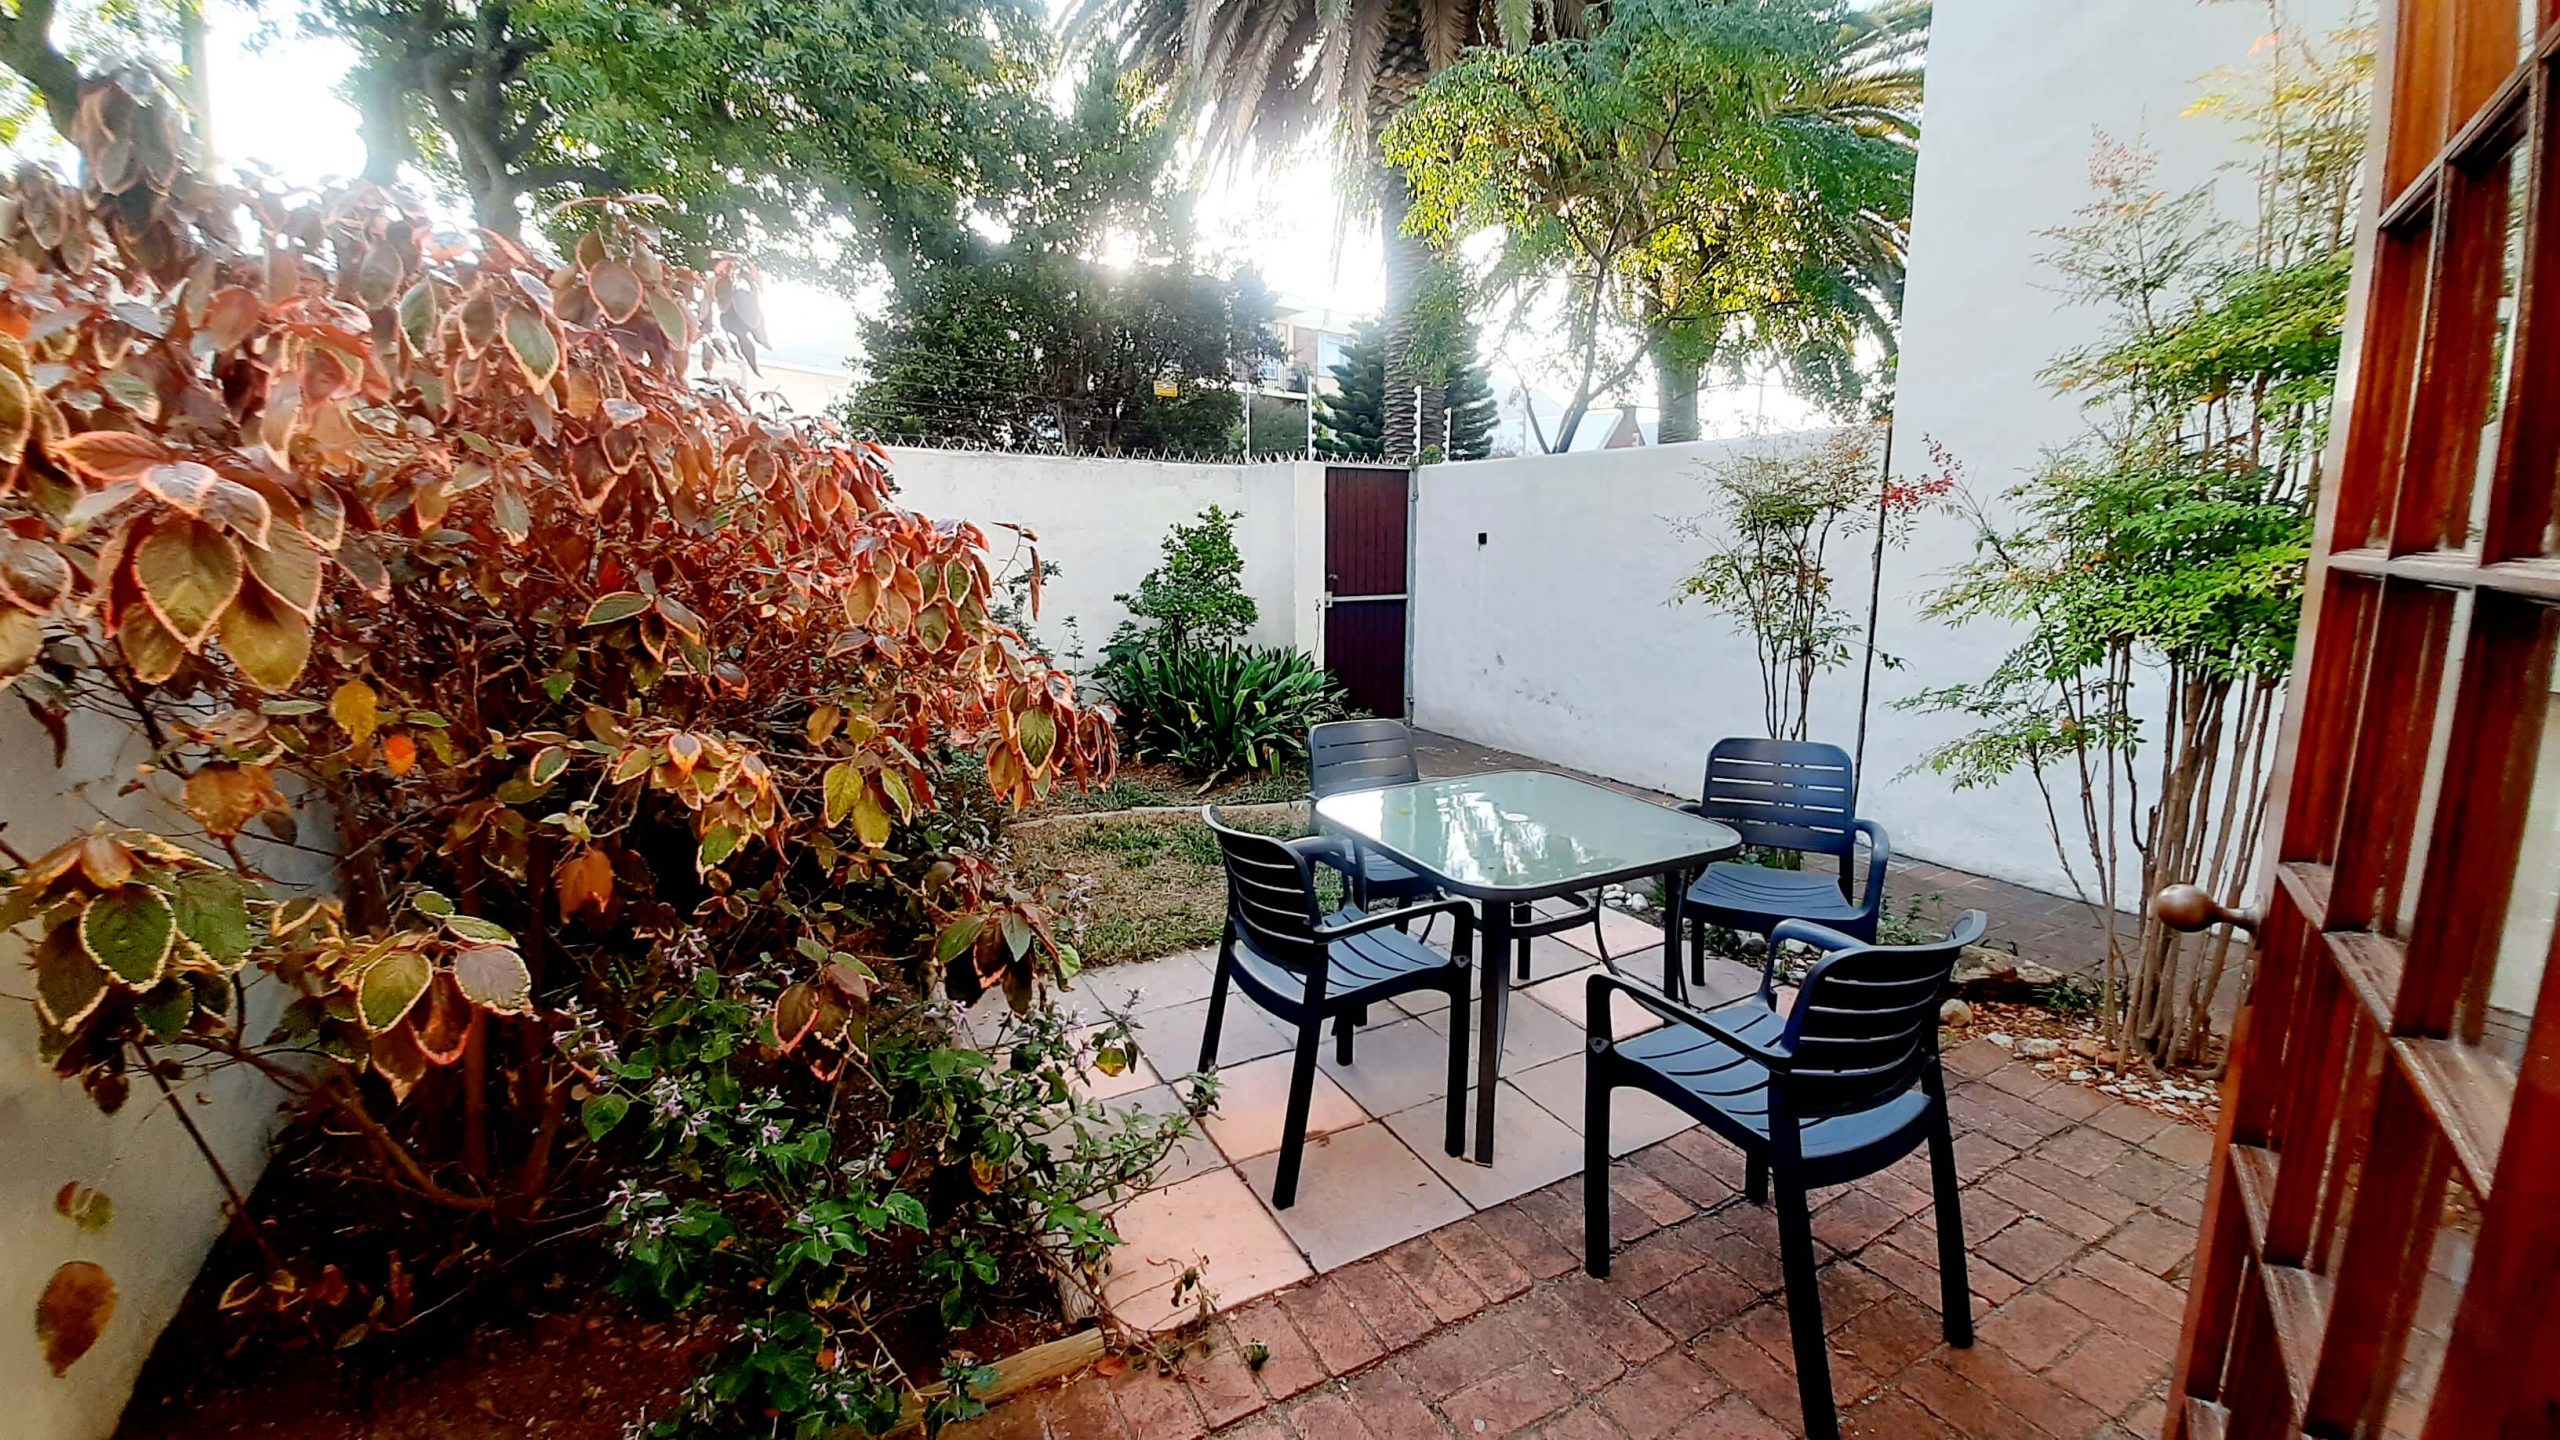 3 Bedroom Townhouse to rent in Harfield Village - LettingWorx